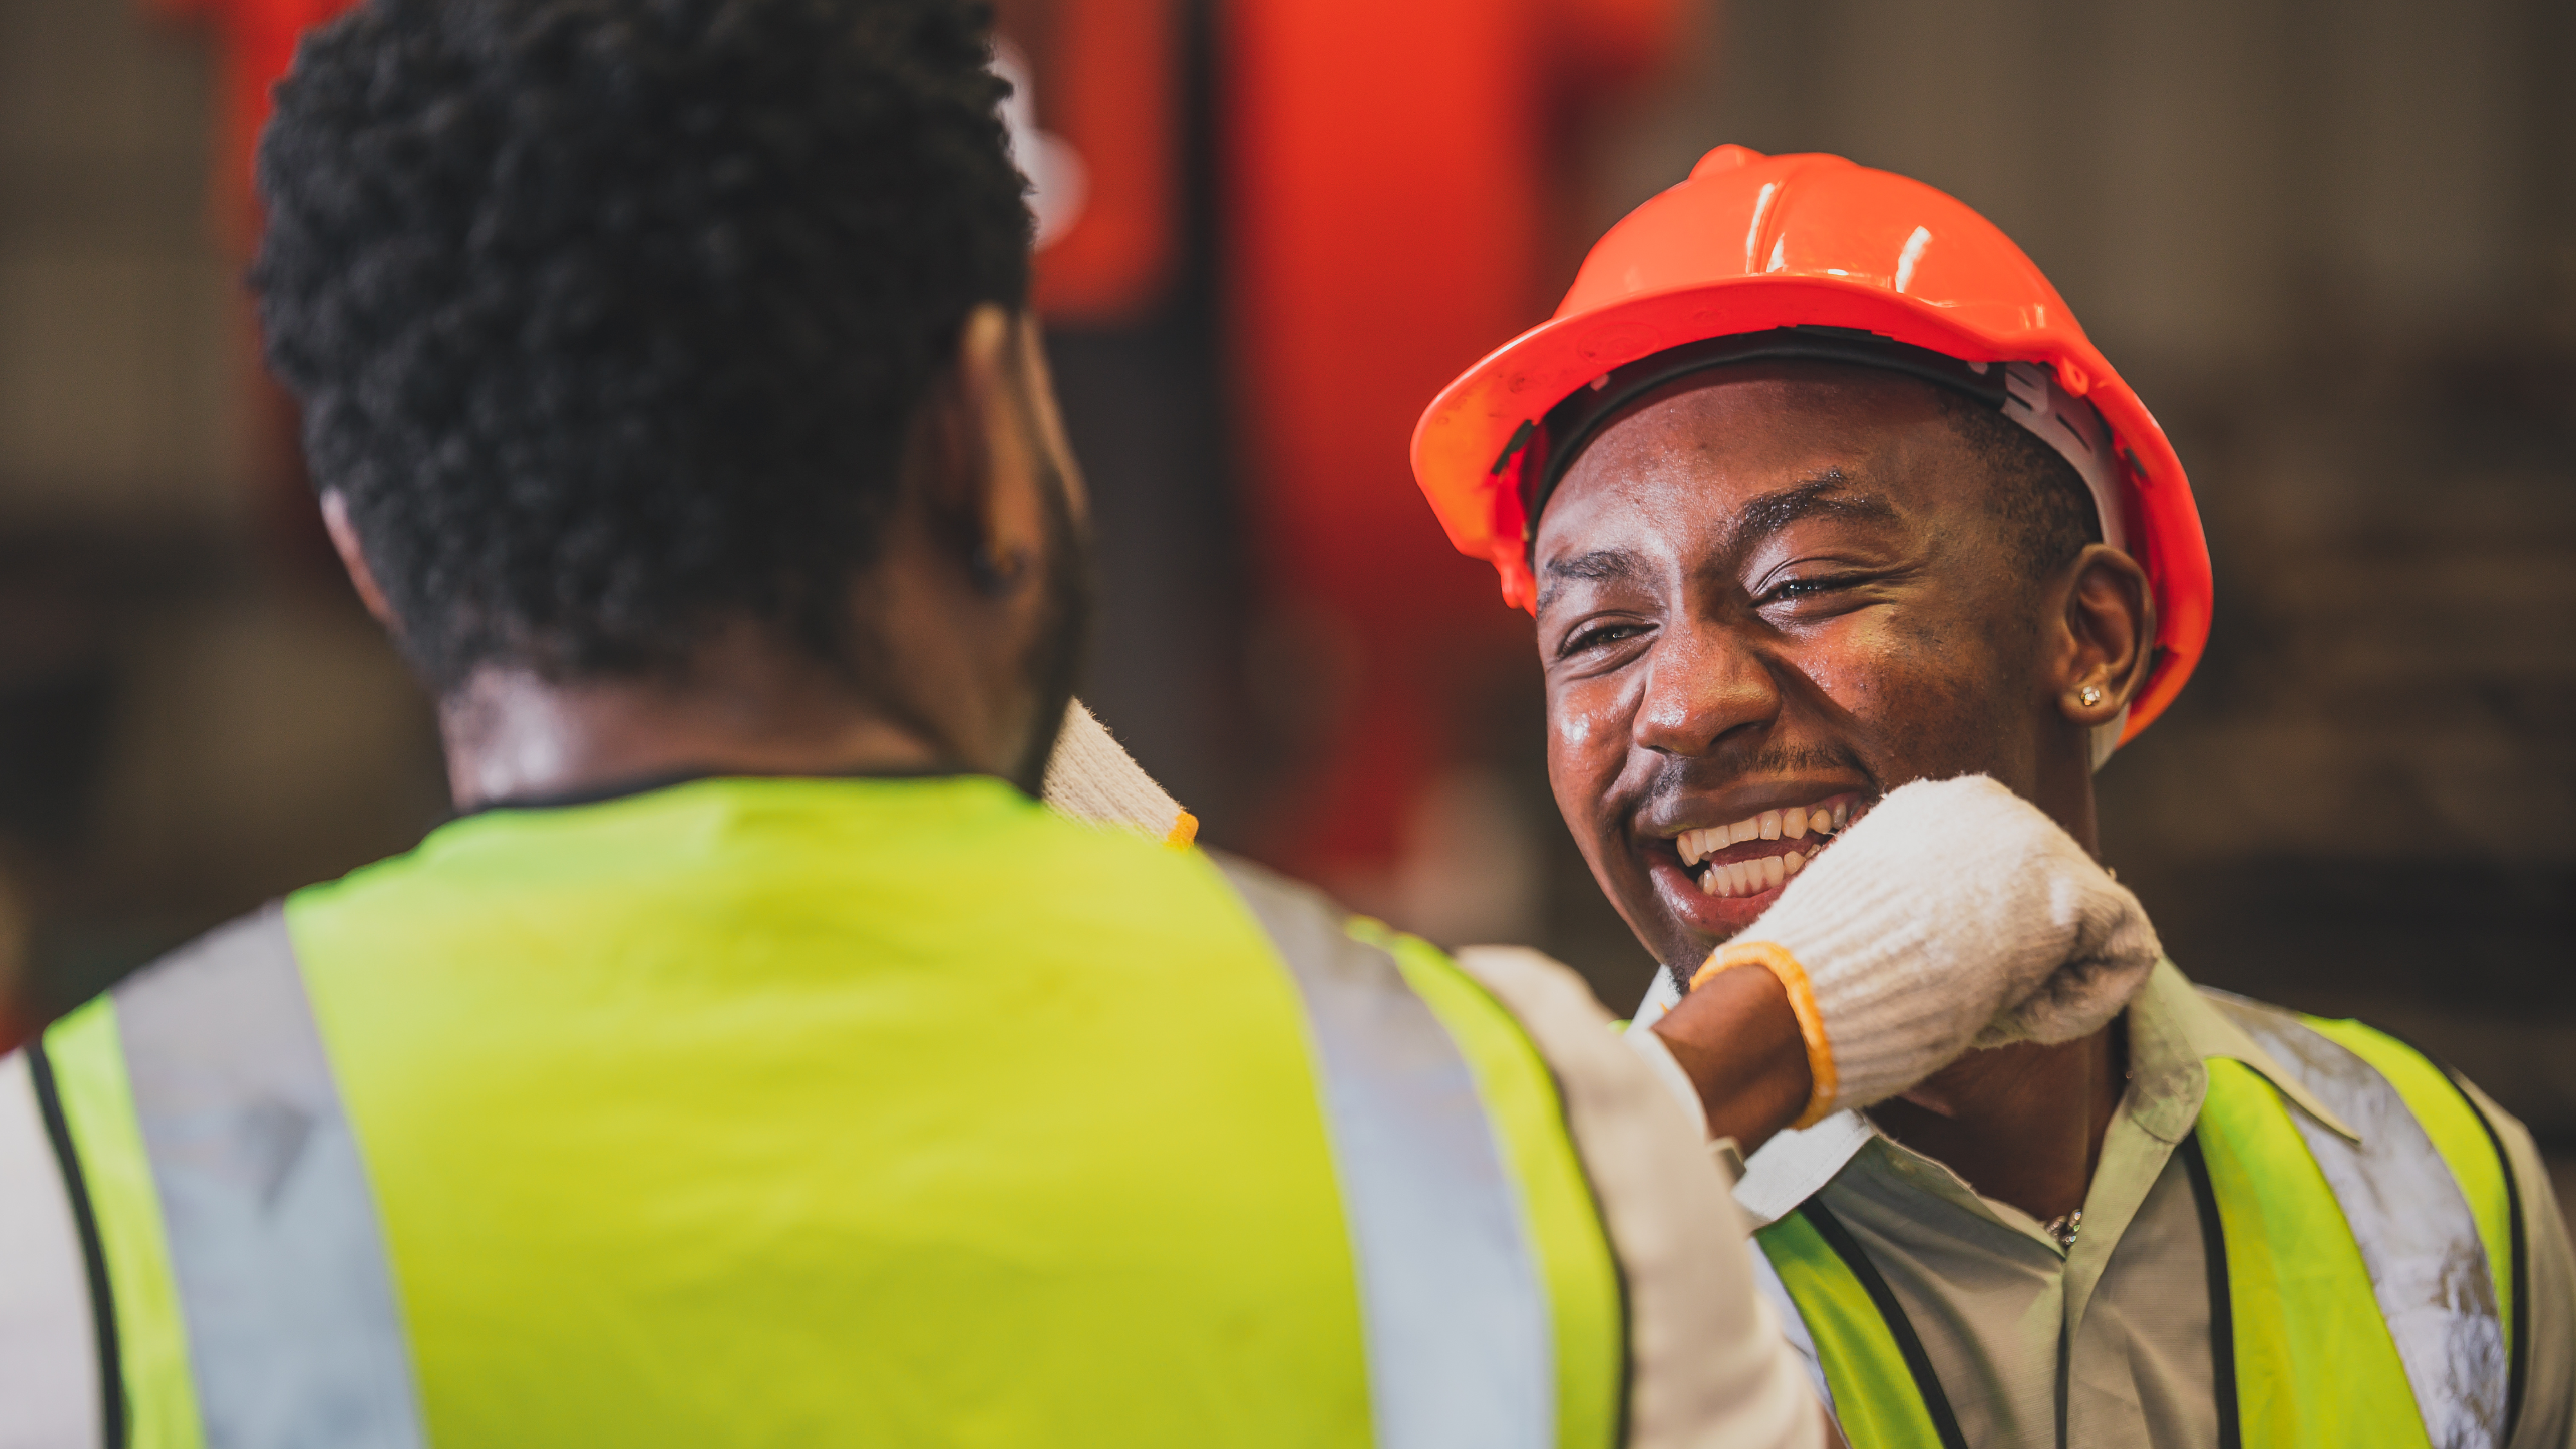 two industrial workers in red hardhats bumping elbows to celebrate a completed task in warehouse distribution center